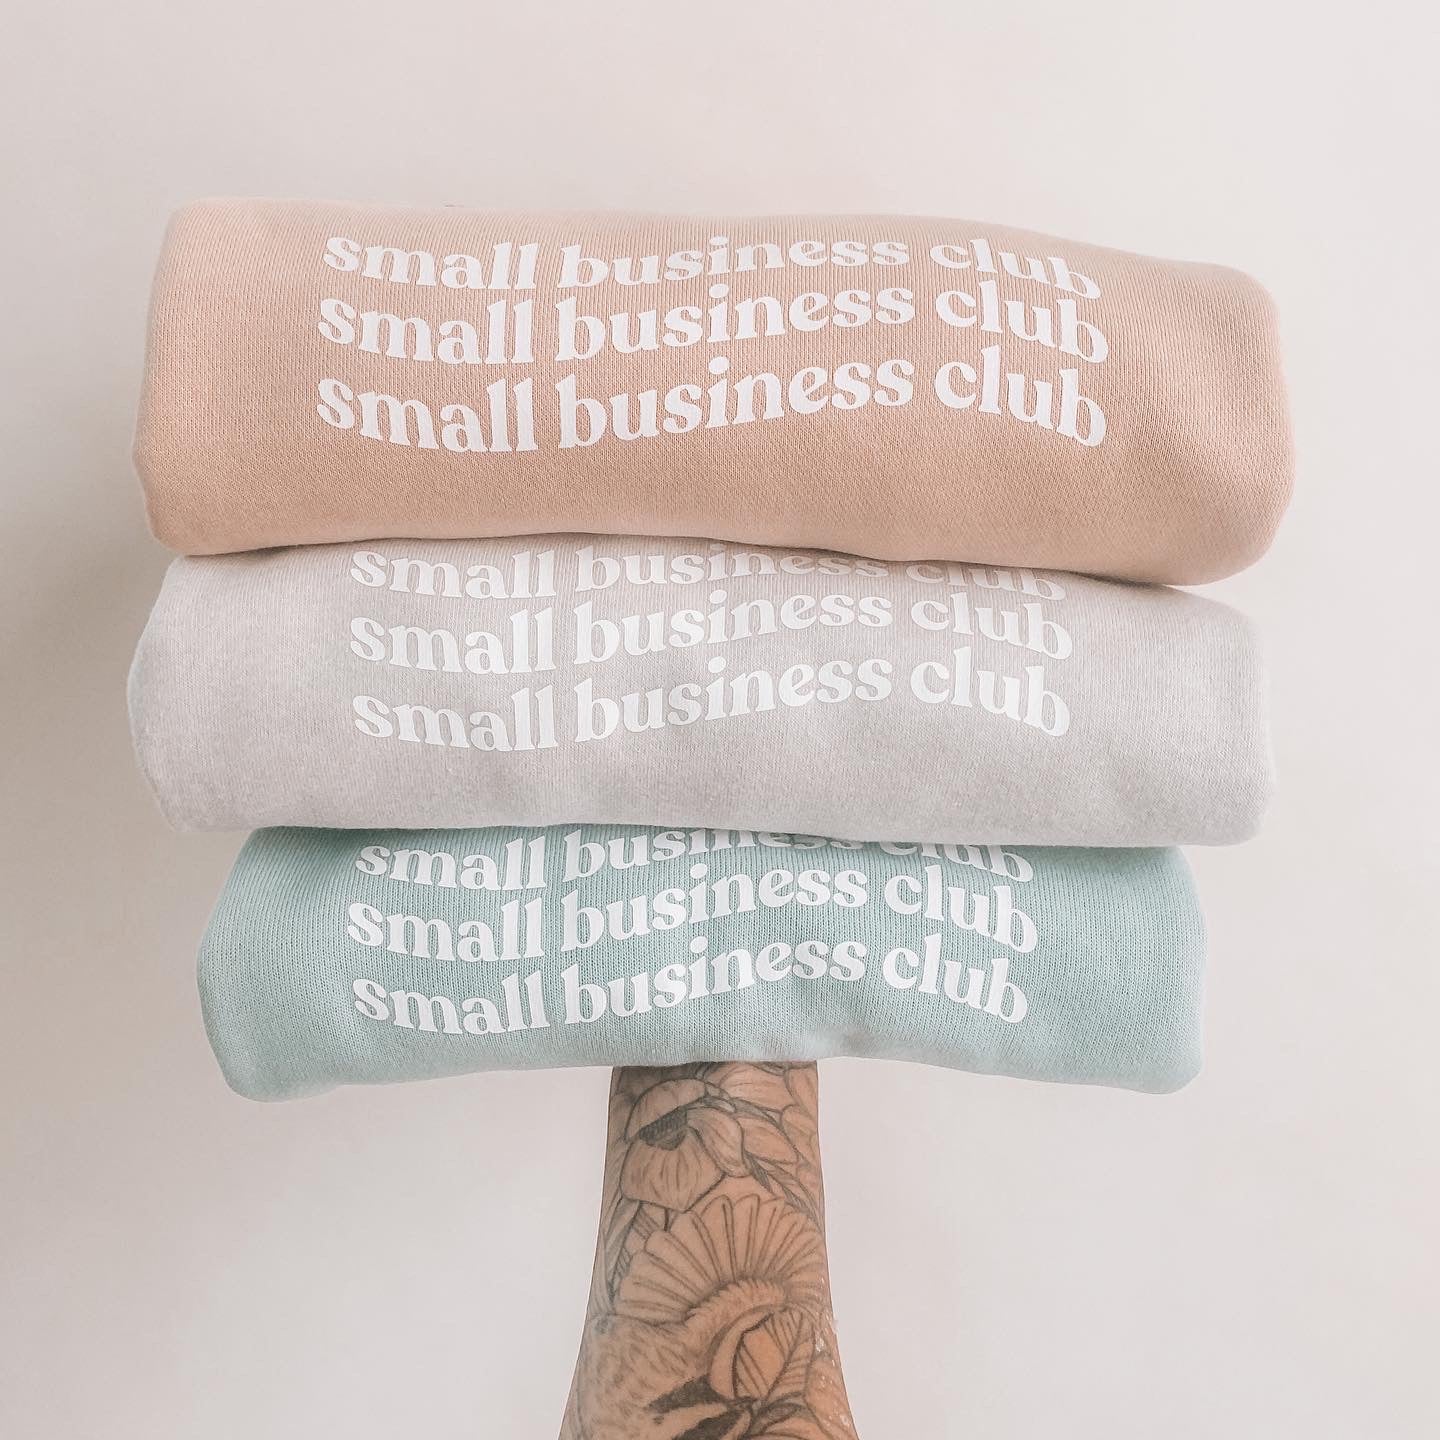 Small Business Club Limited Edition